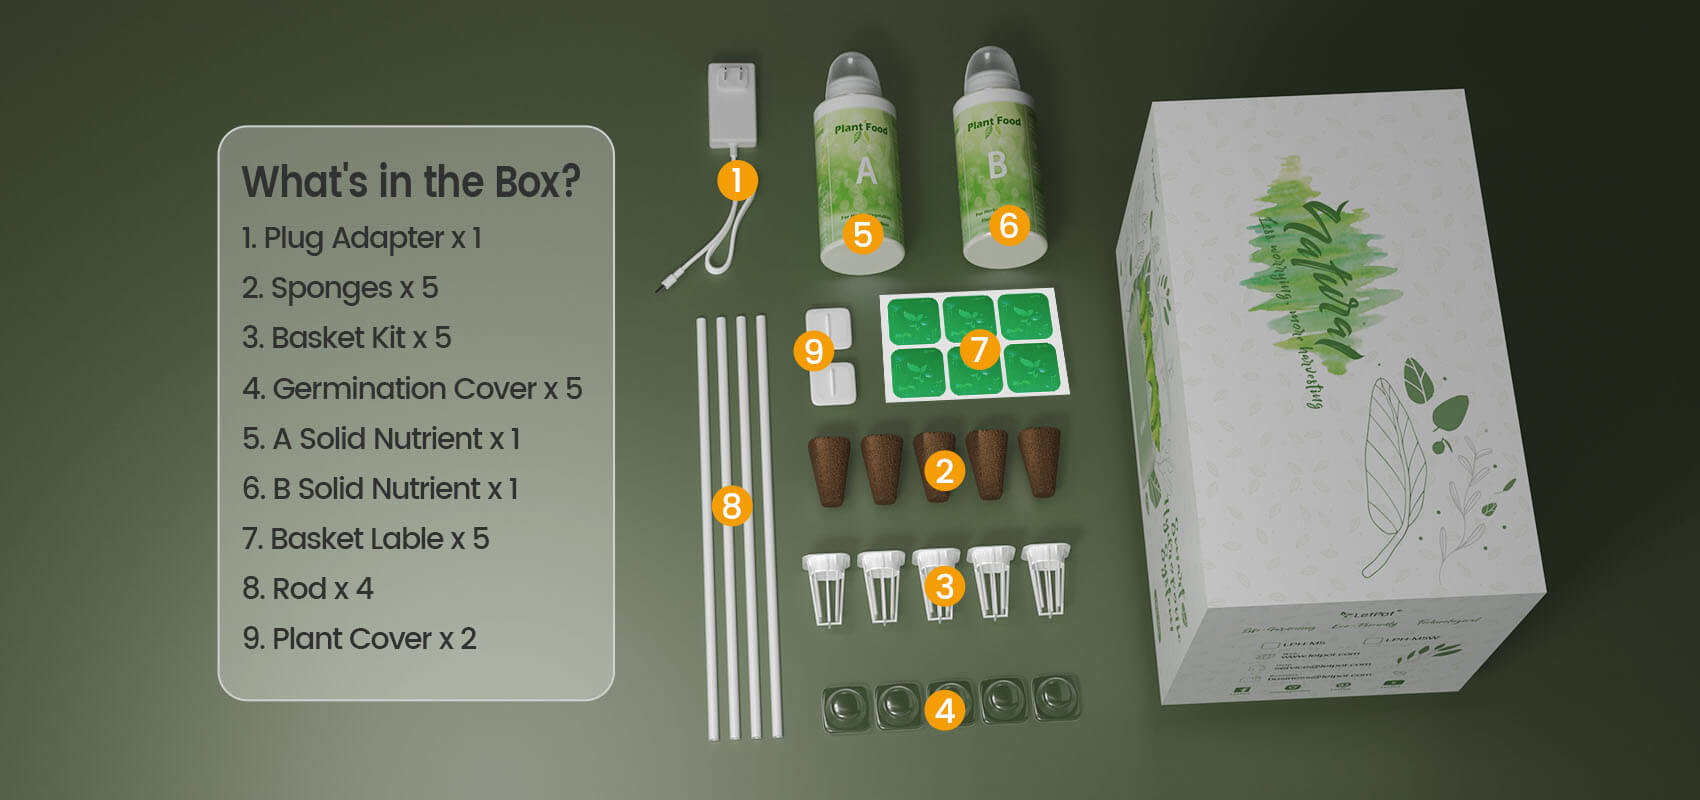 What's in the Box - LetPot Mini Hydroponic Growing System